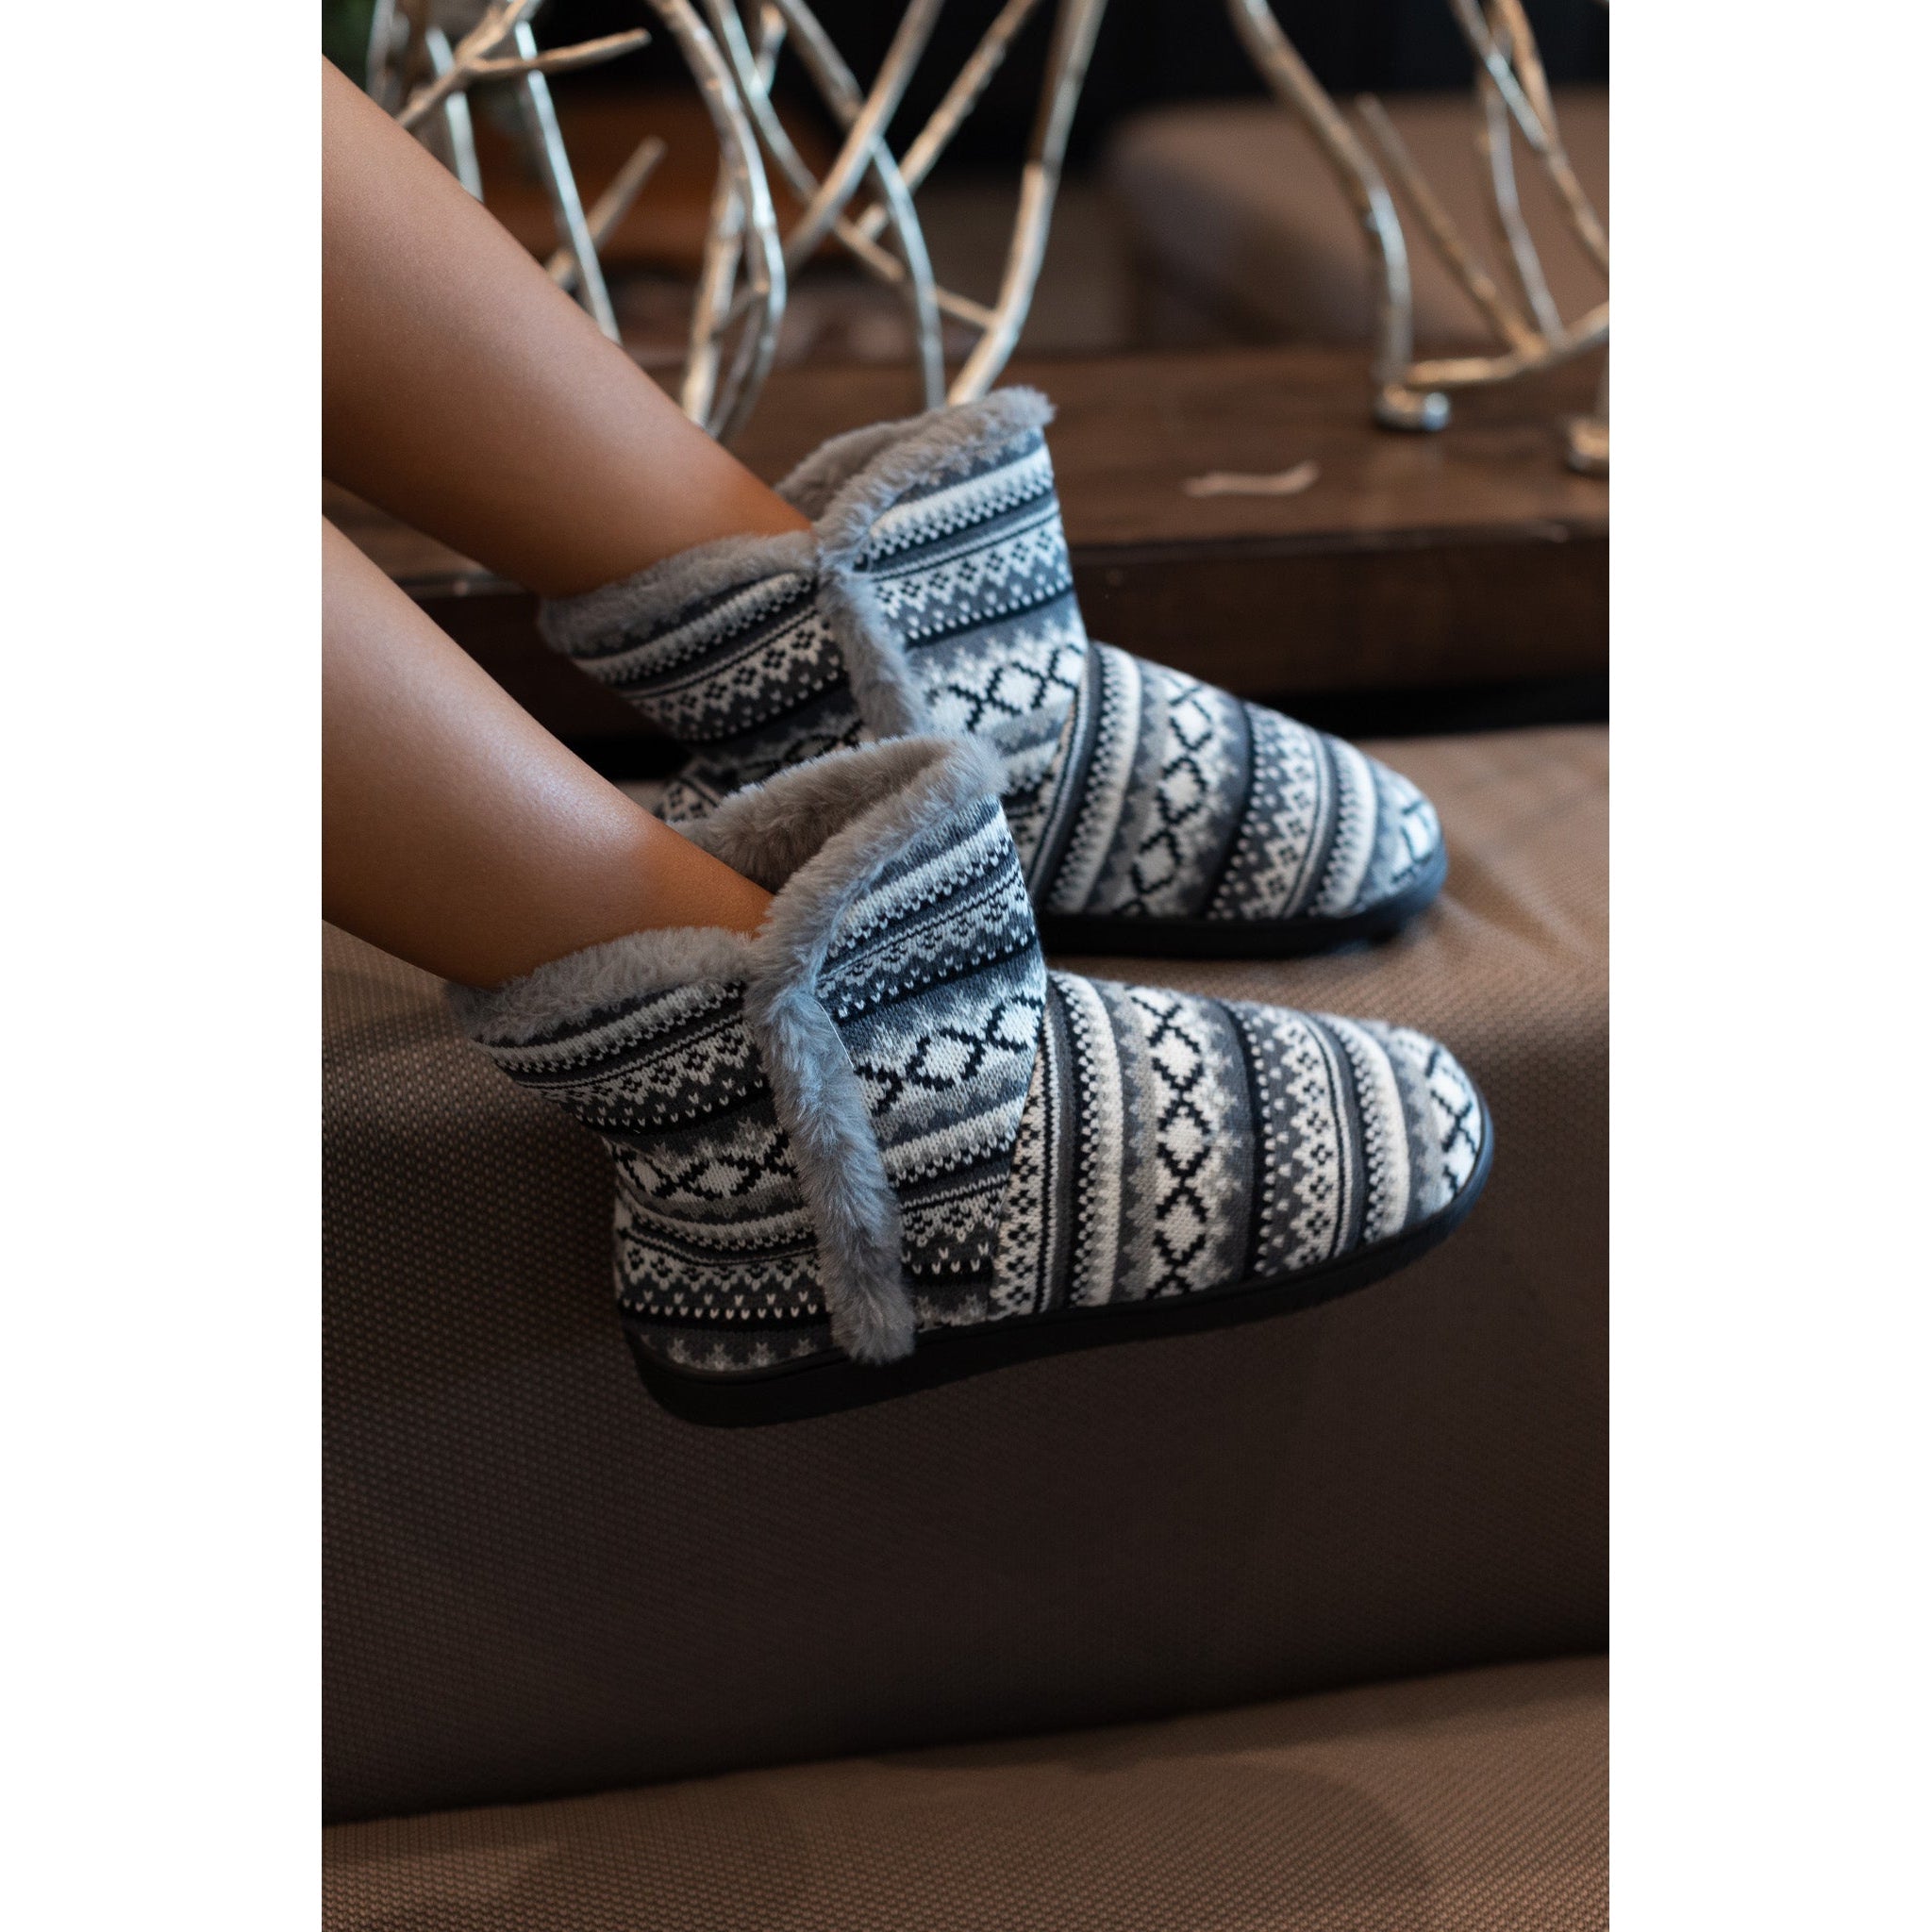 The Leah Plaid Knit Booties